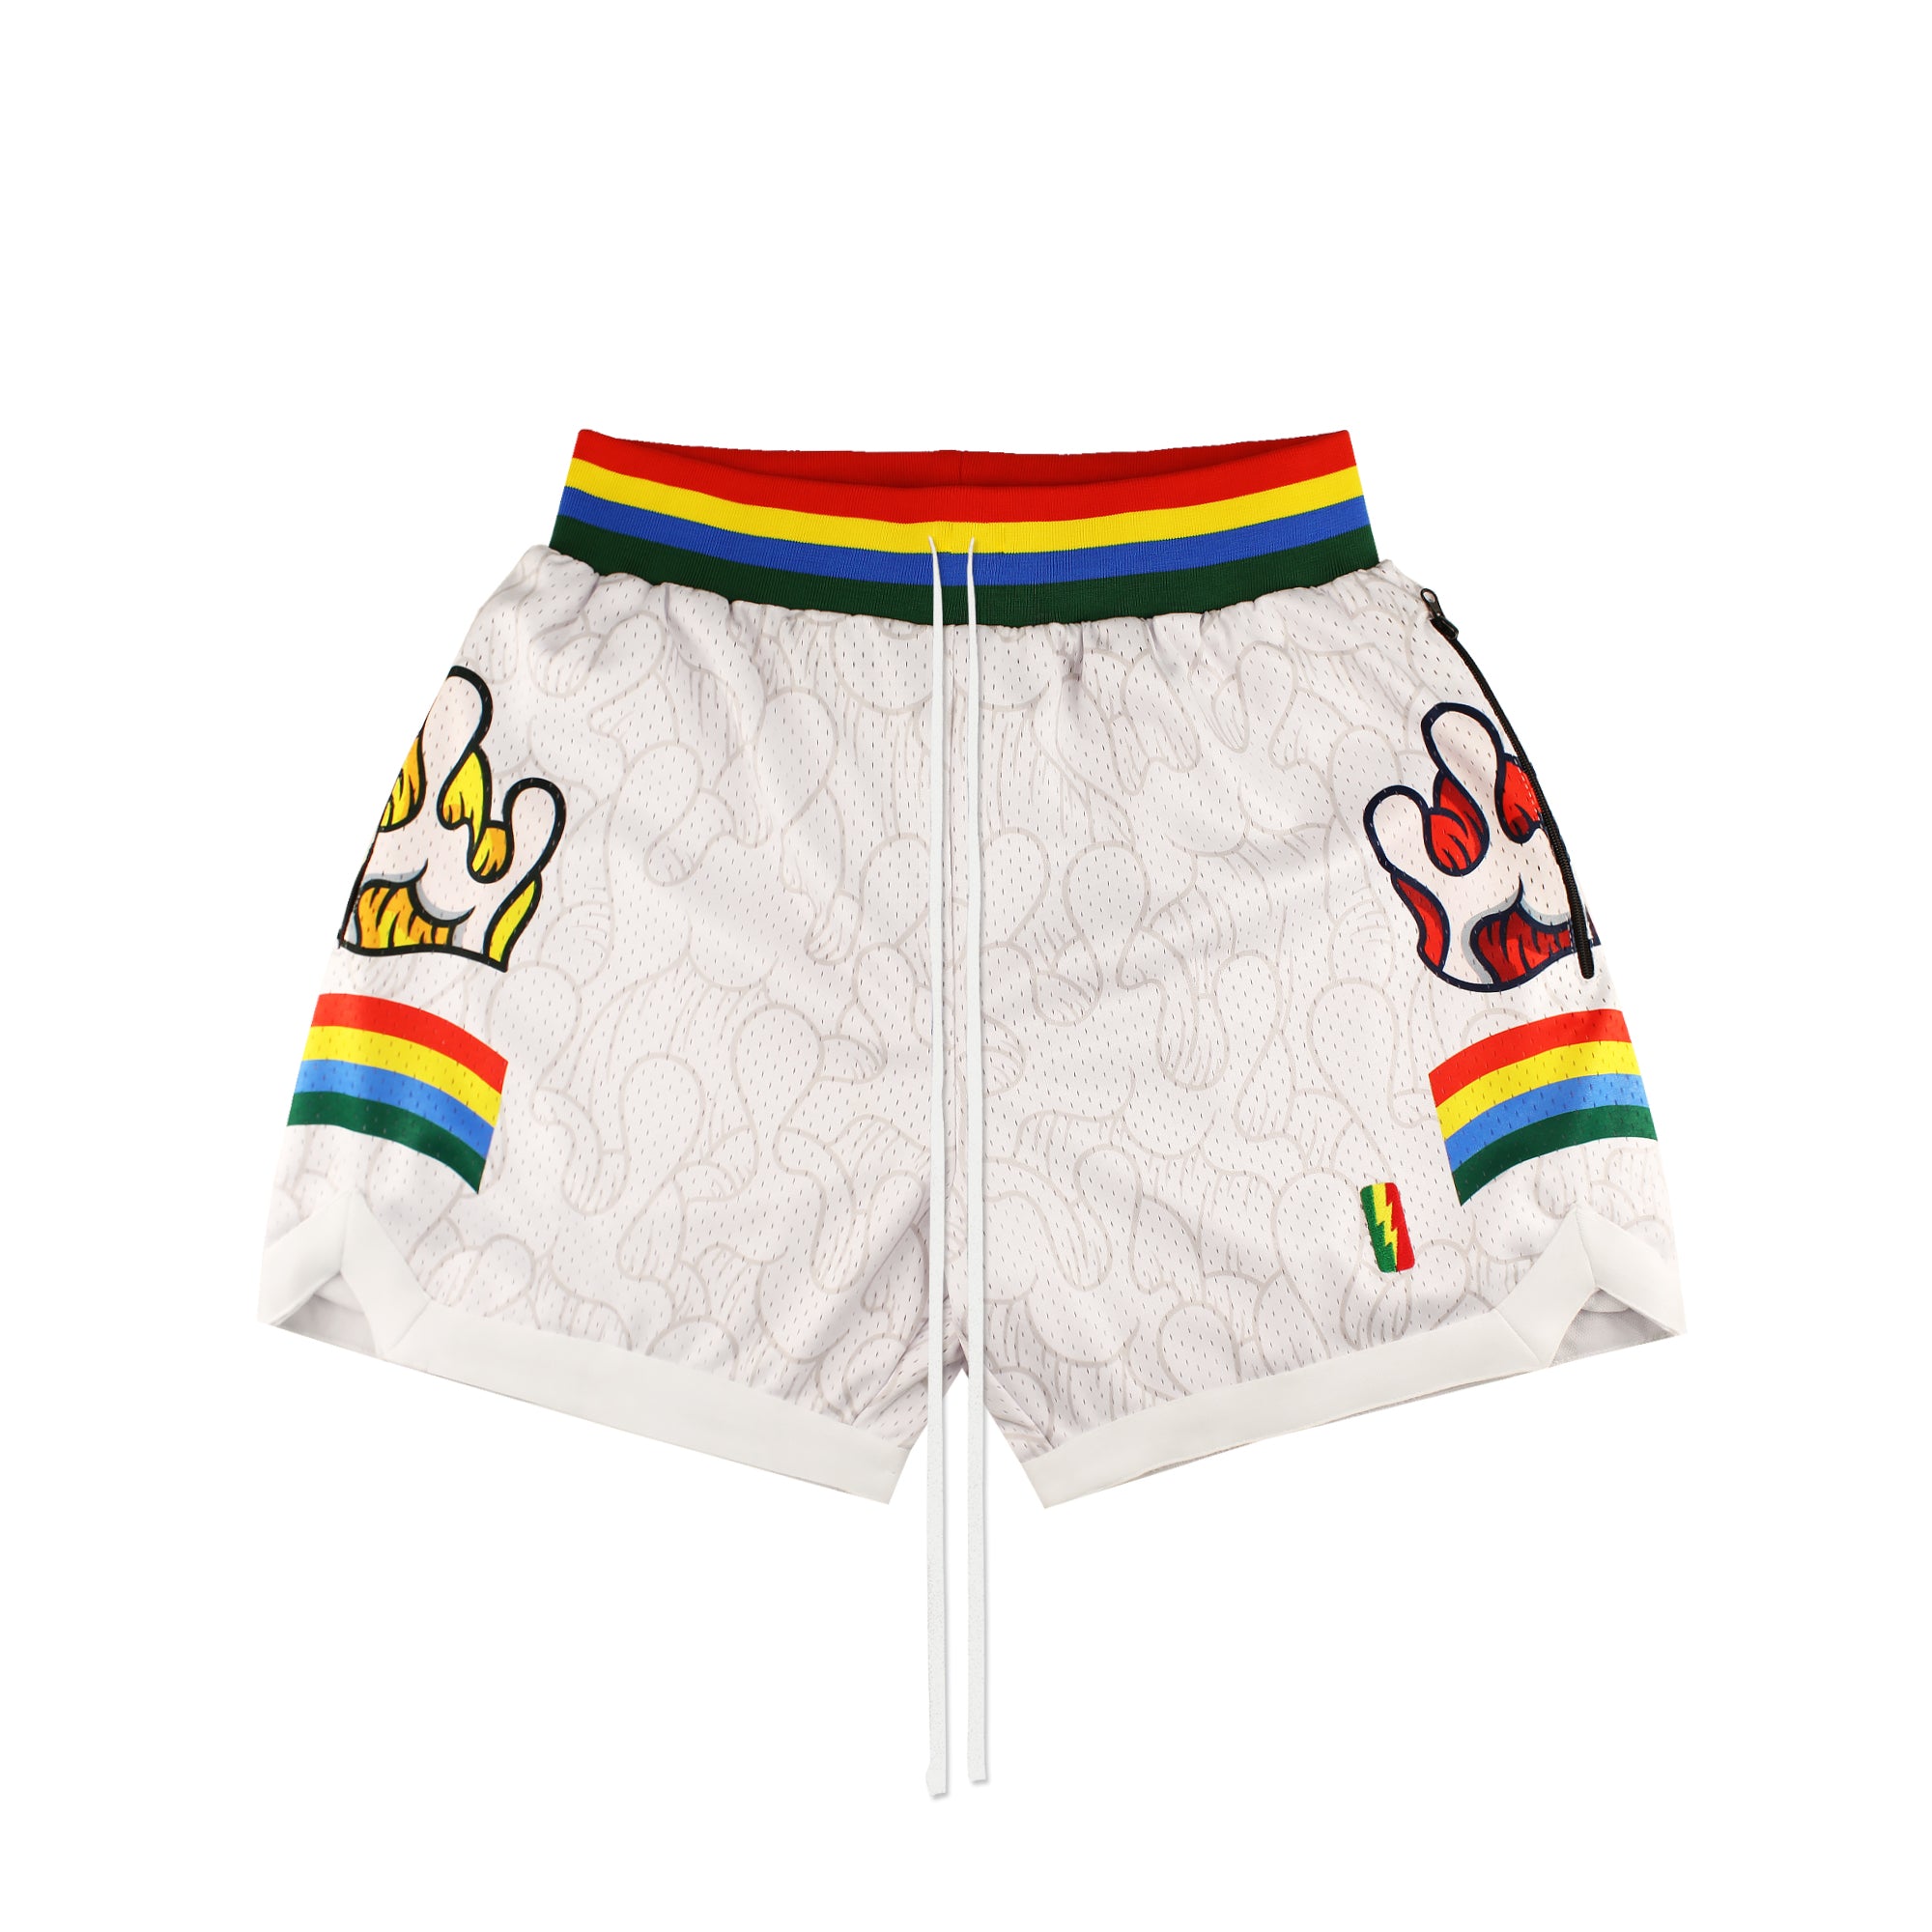 AARON KAI BE@RBRICK SHORTS – COLLECT AND SELECT